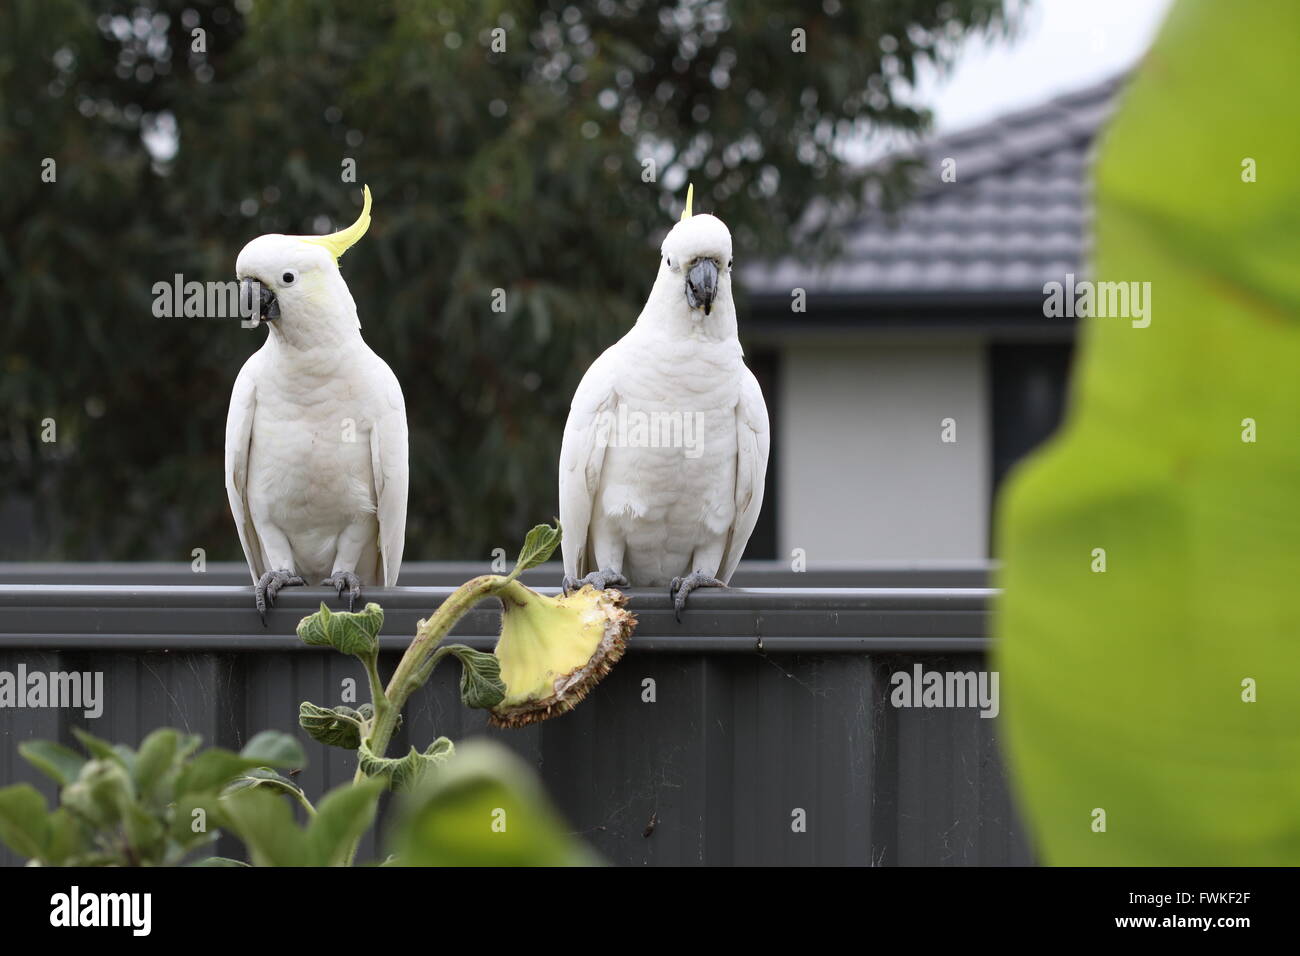 White Cockatoos or known as Sulphur-crested Cockato on metal fence Stock Photo